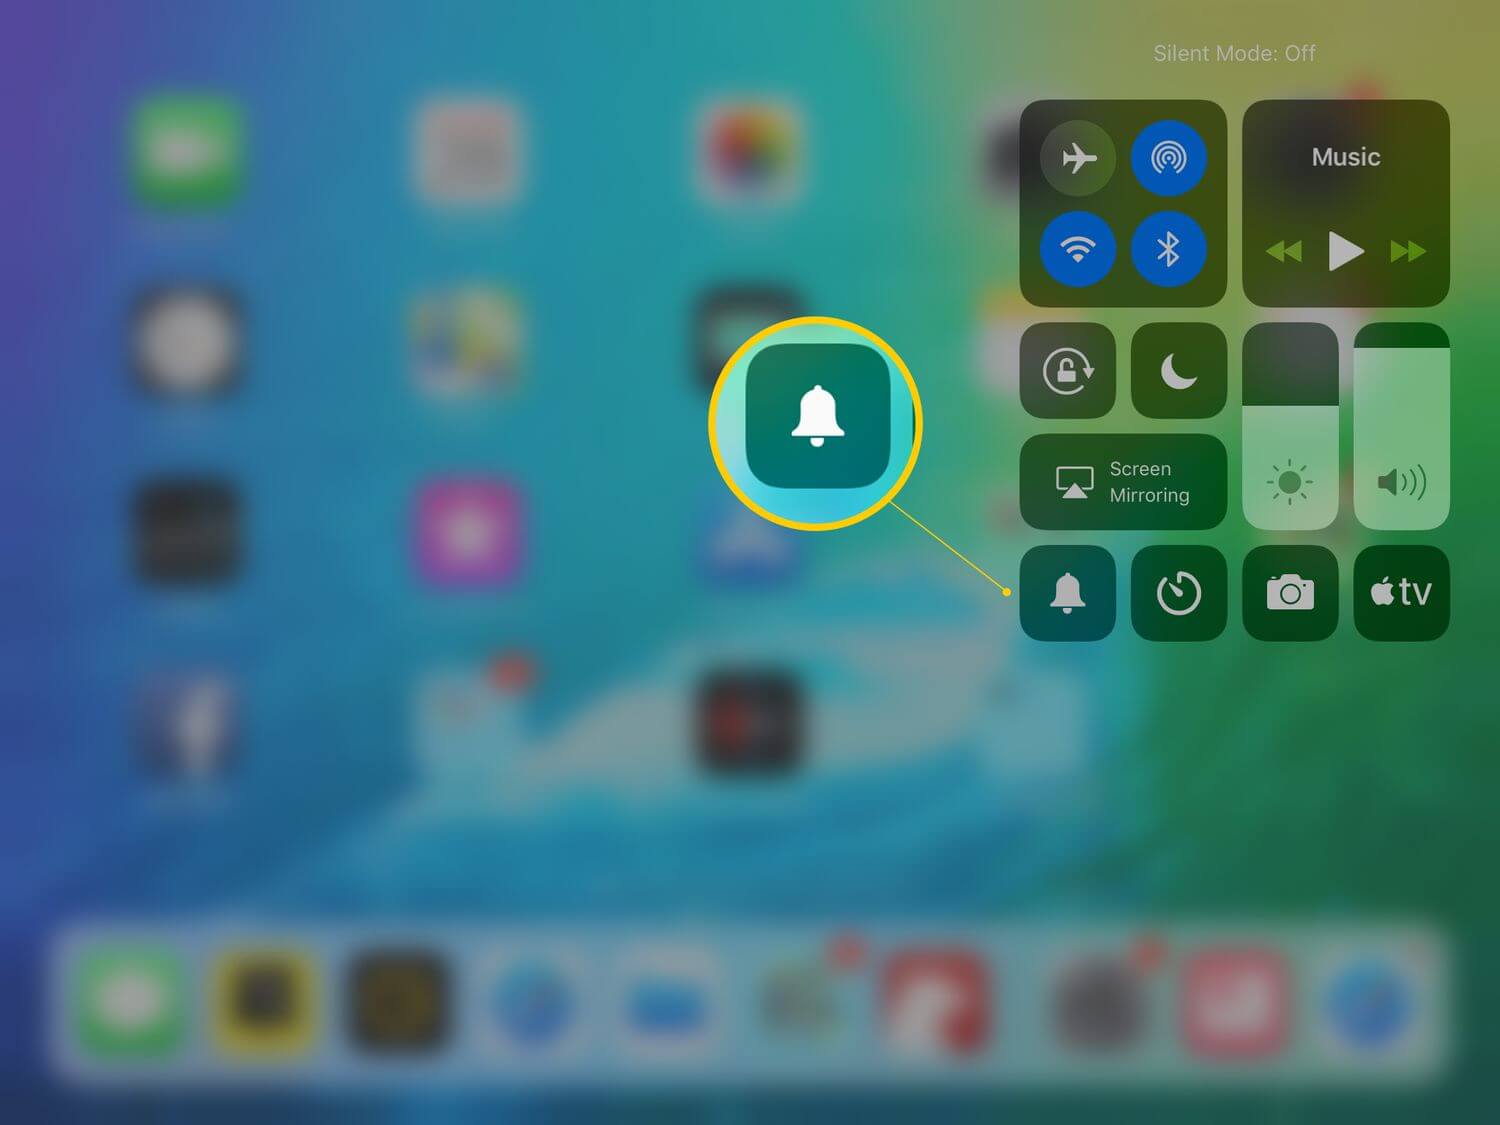 Silent mode in Control center